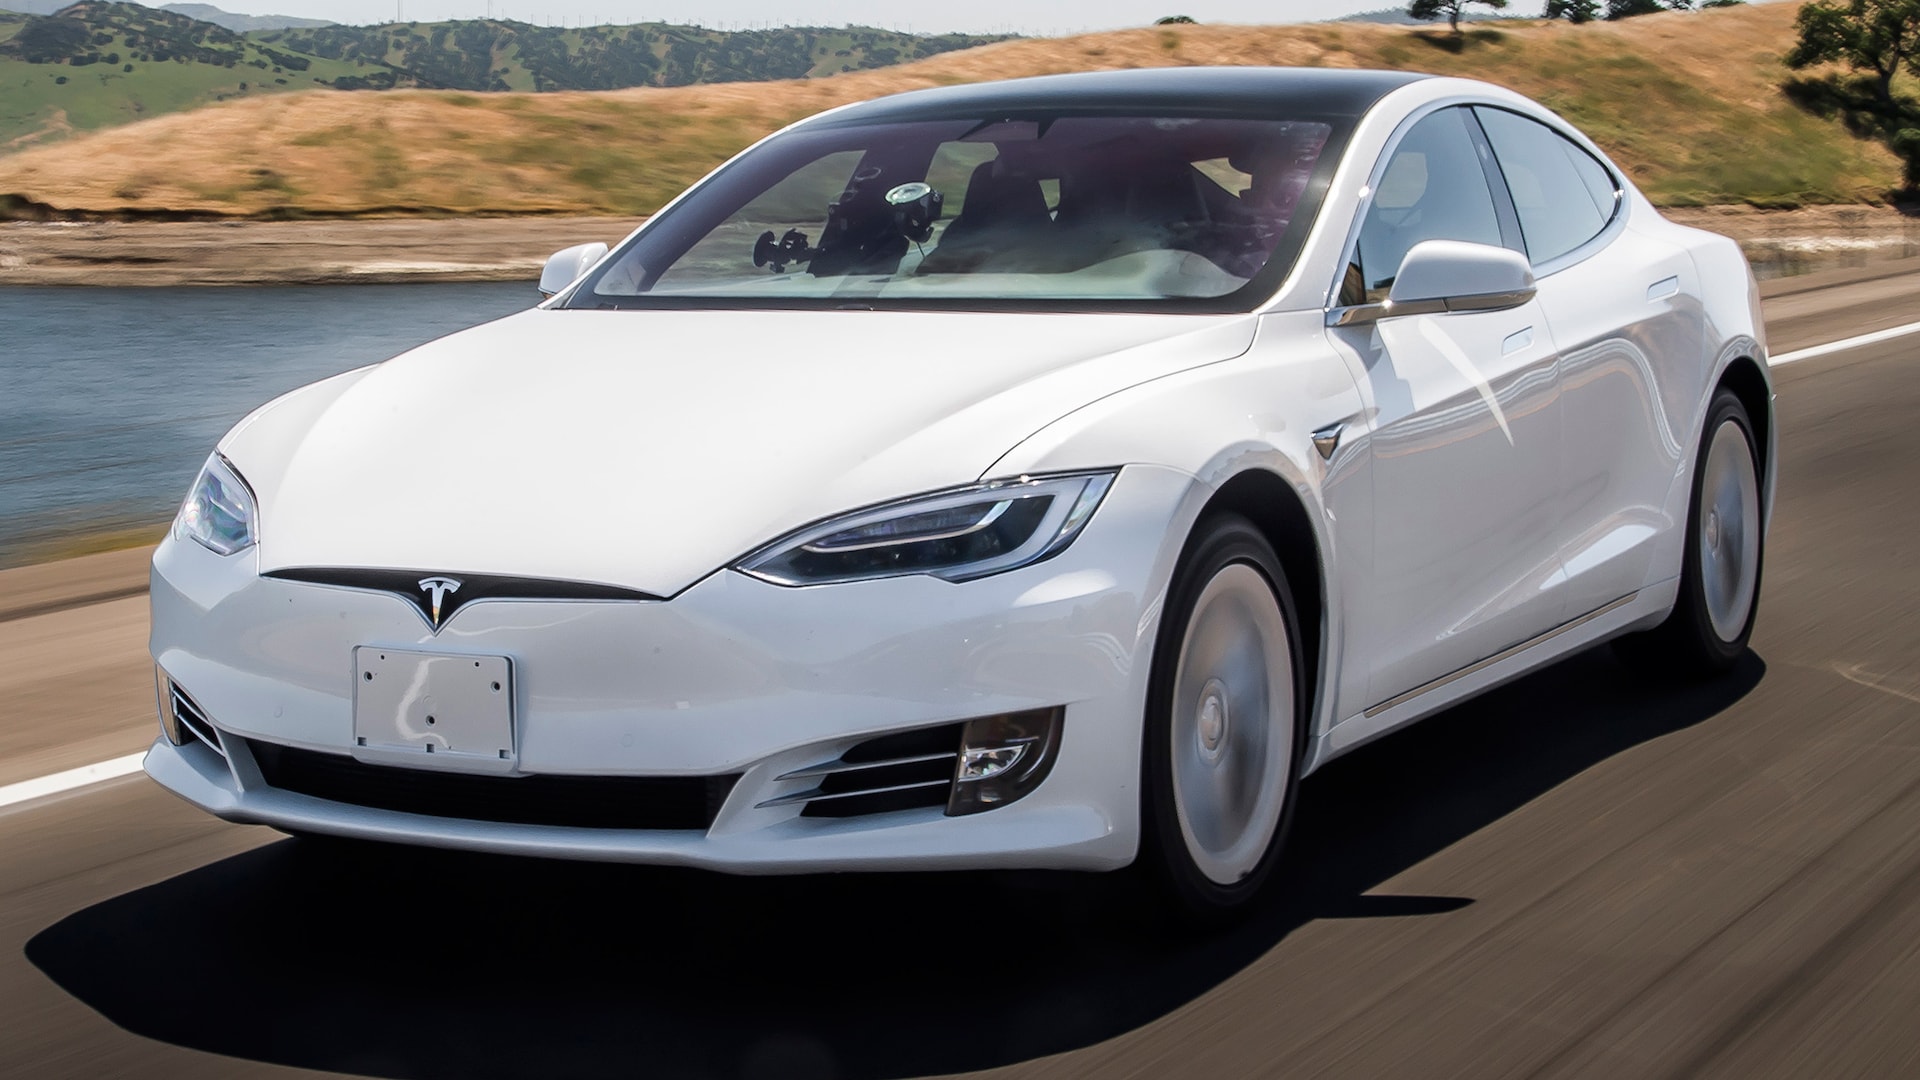 EXCLUSIVE: Can a 2019 Tesla Model S Make it from SF to LA on One Charge?